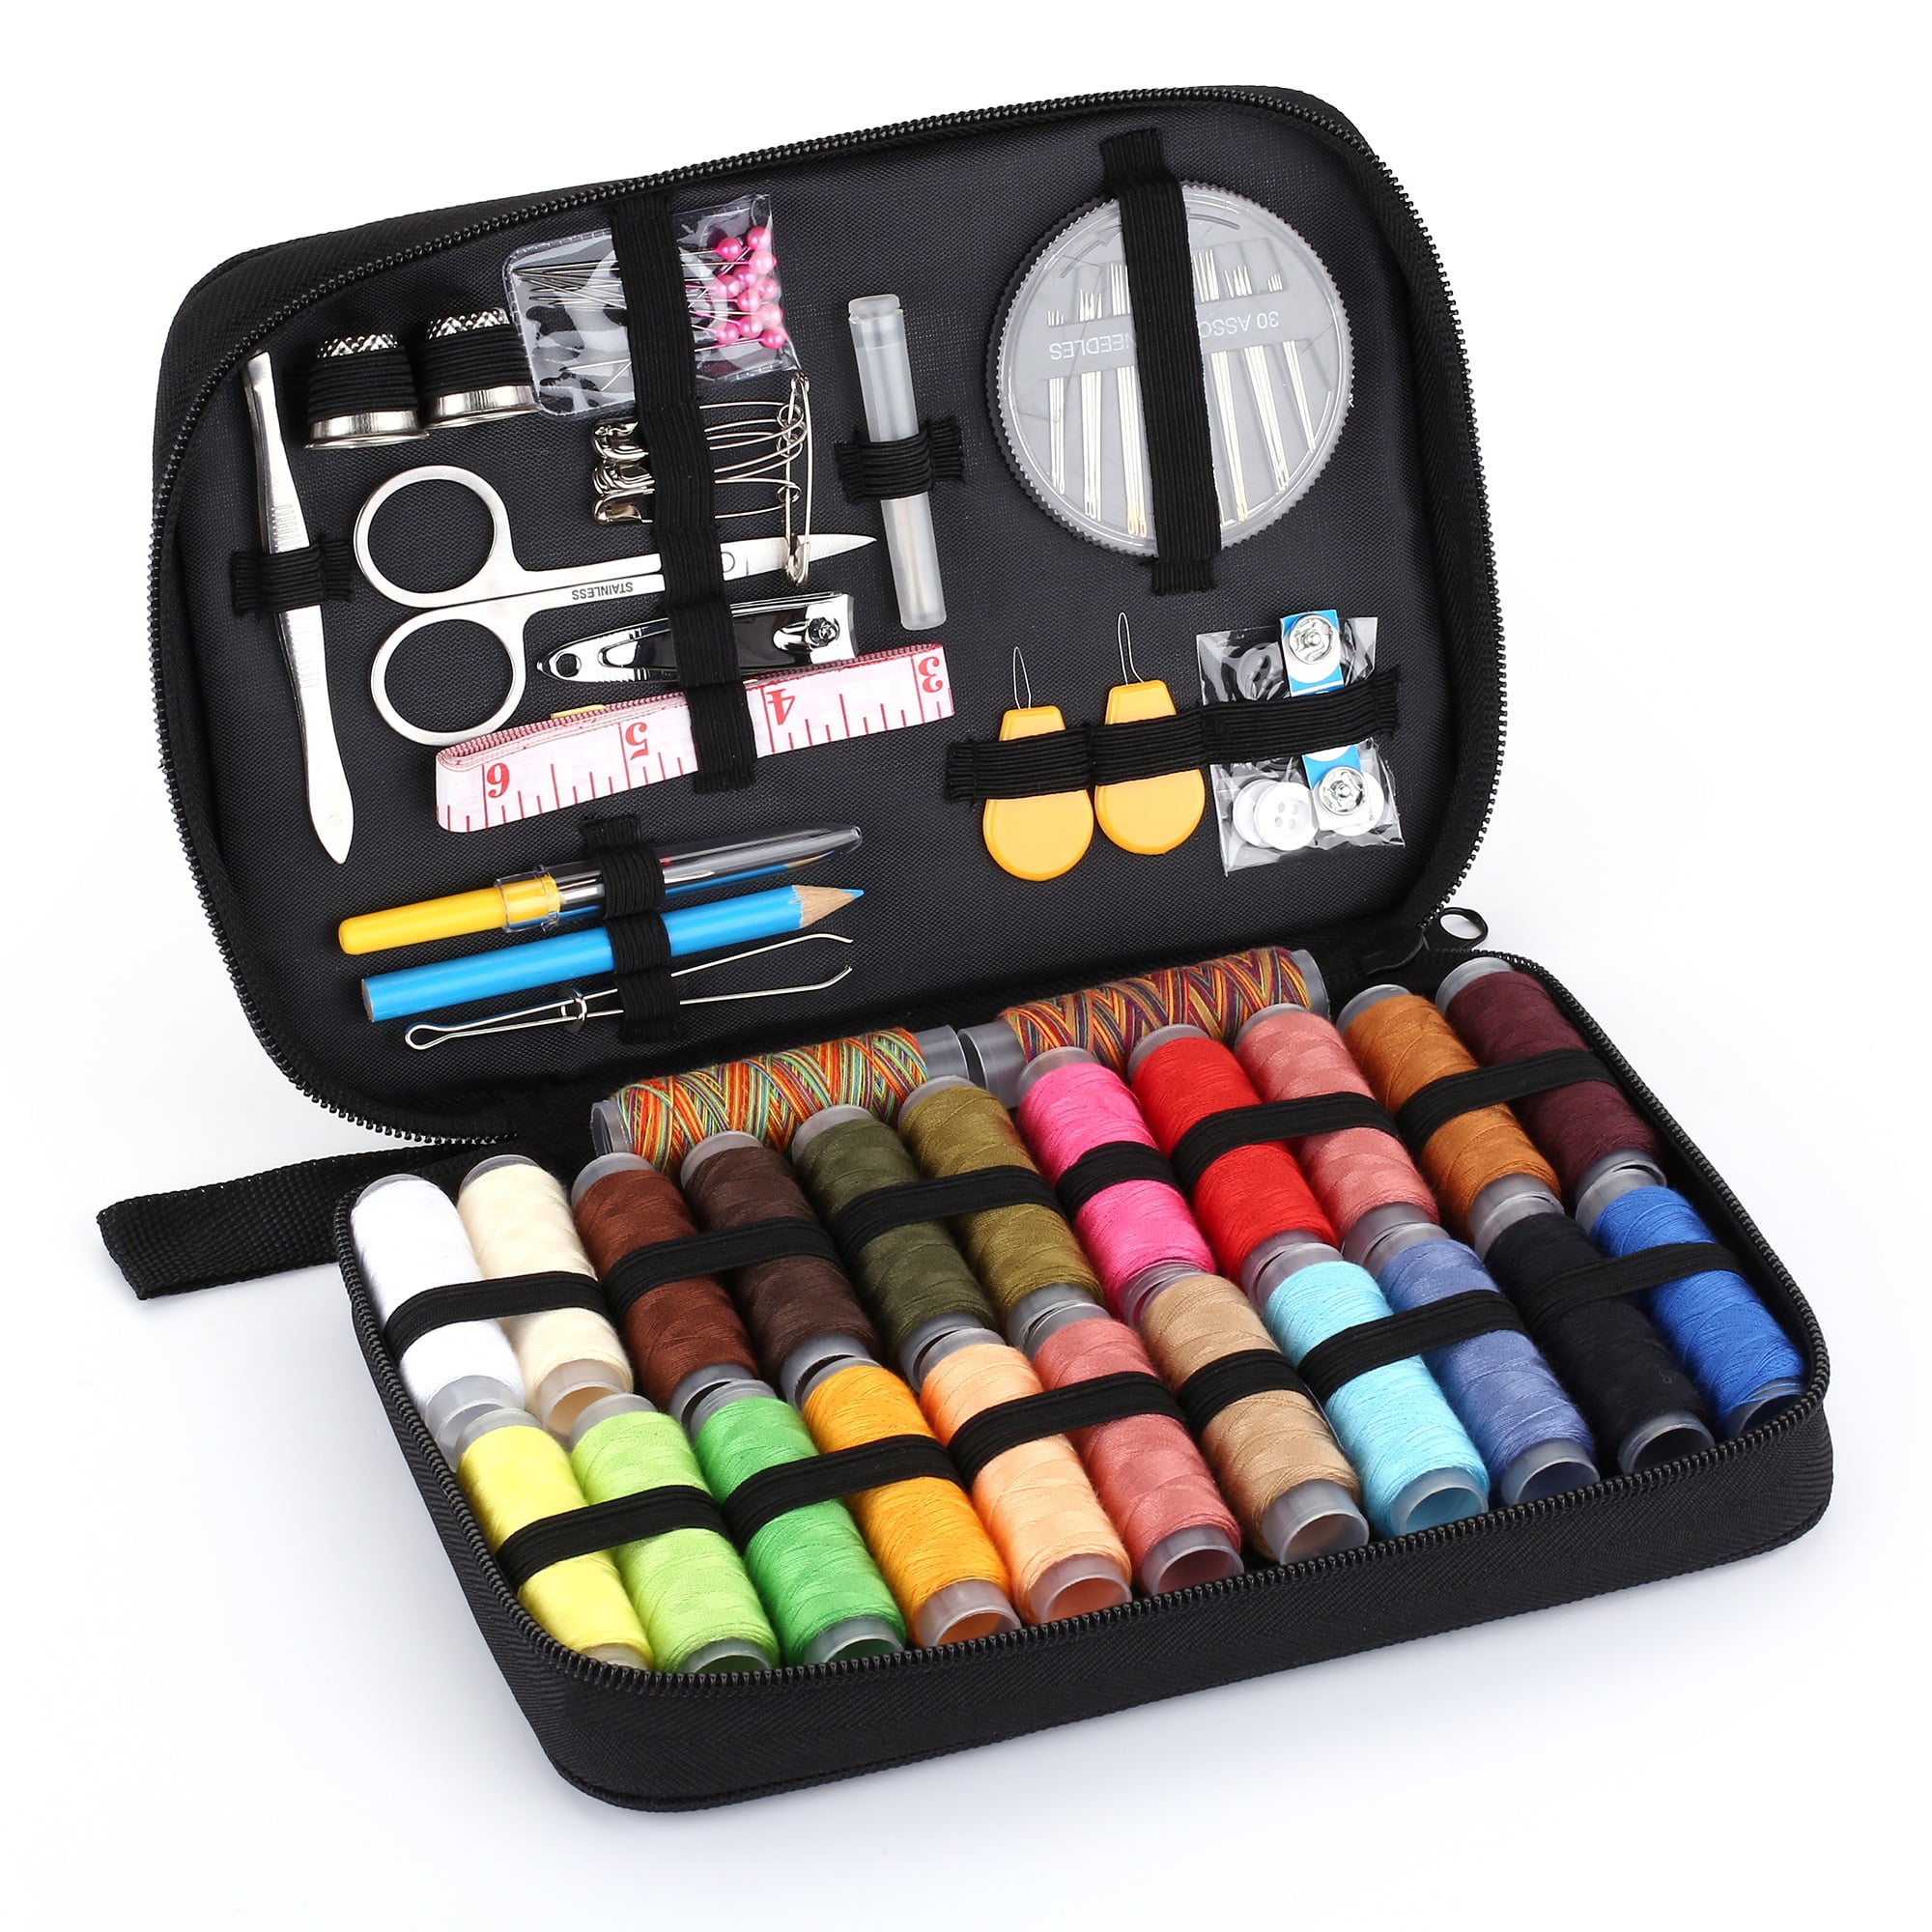 Sewing Kit With 97 Sewing Accessories, Include Thimble, Thread, Needles ...